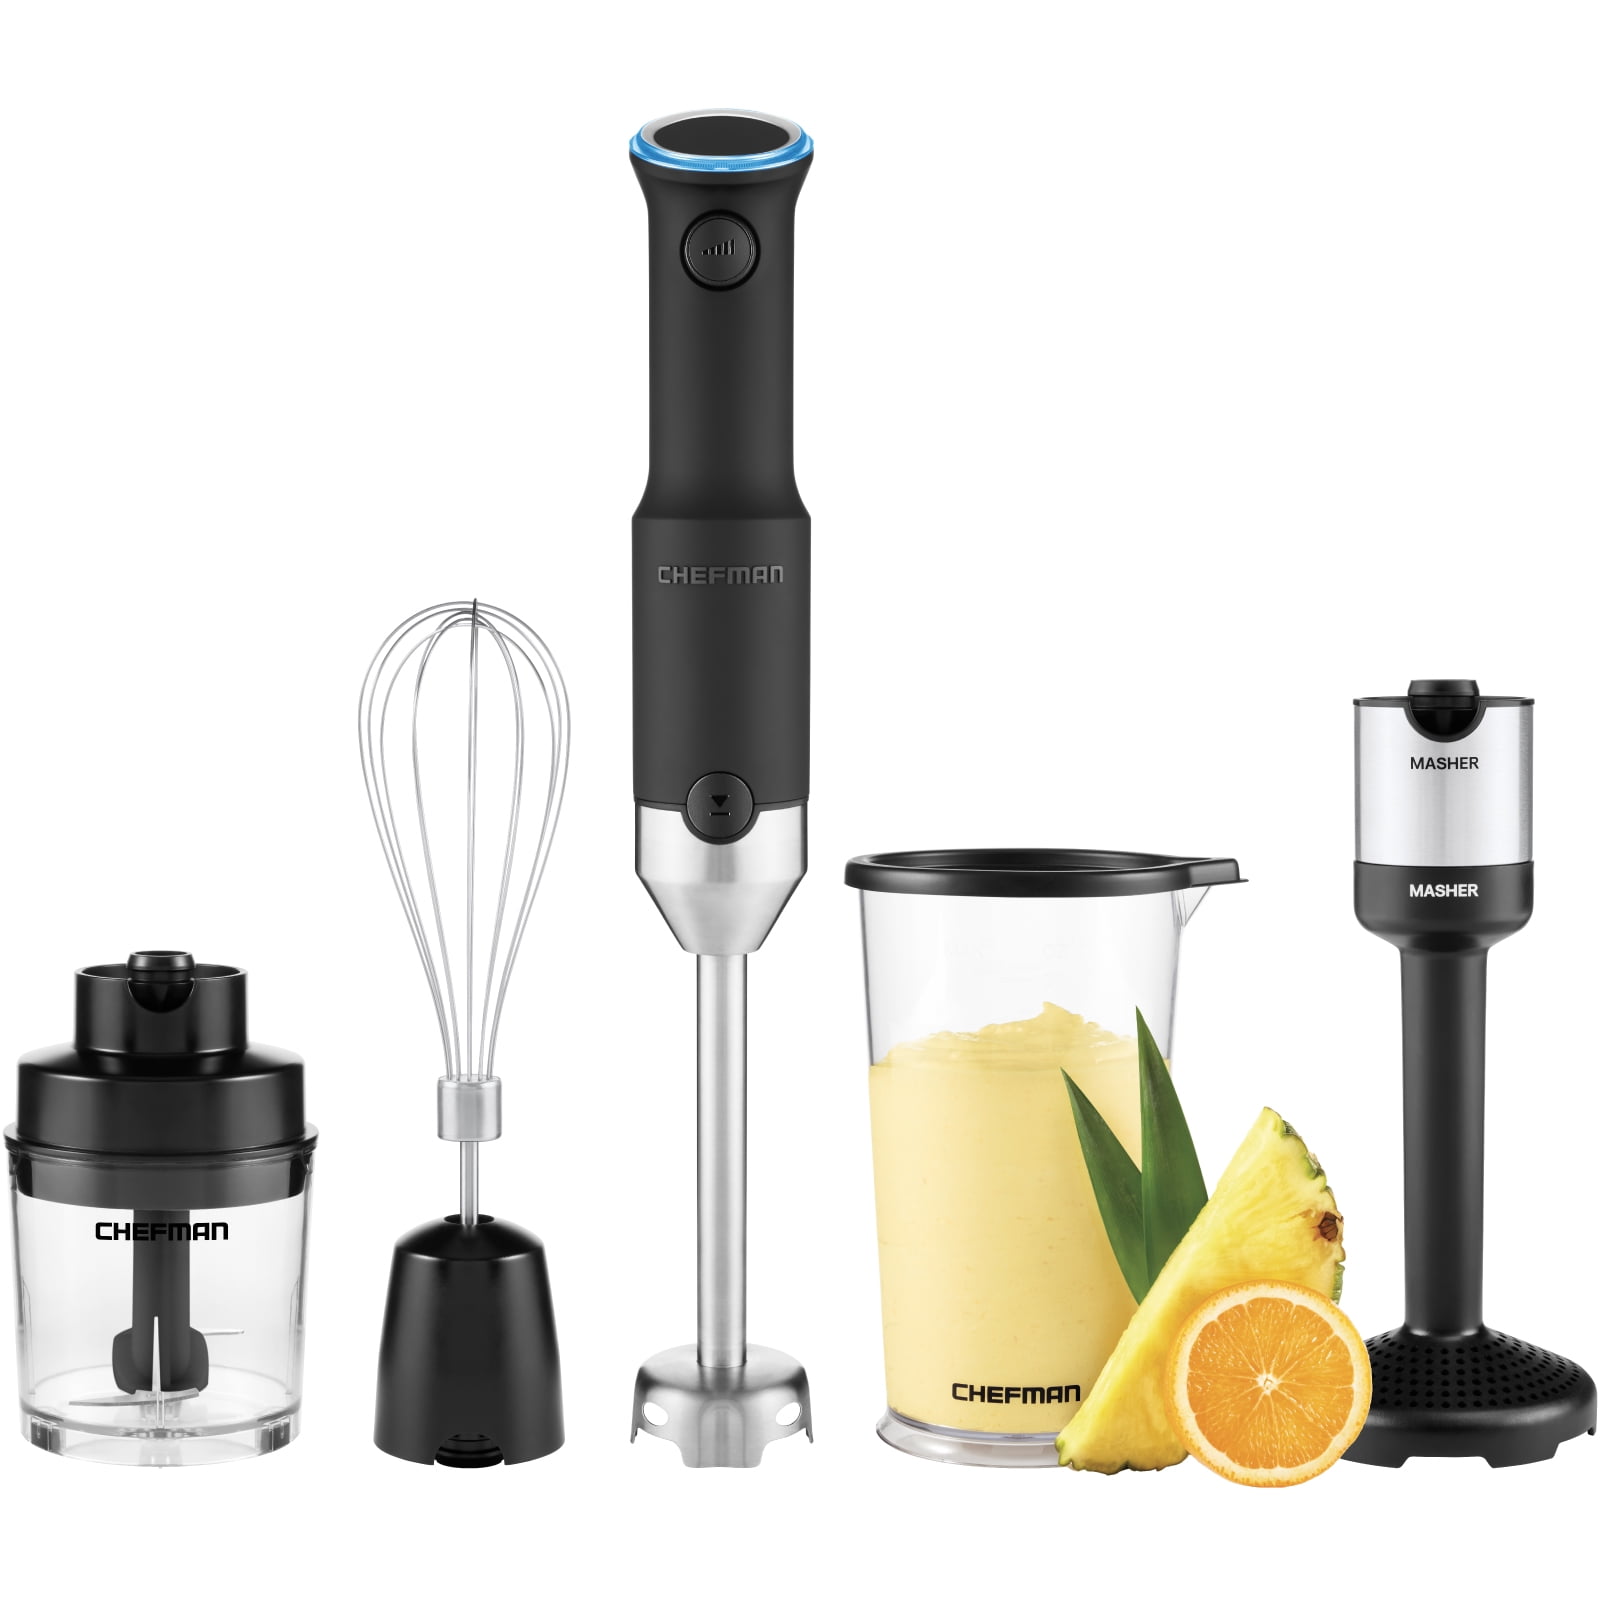 Cuisinart 5-Speed Stainless Steel Immersion Blender with Accessory